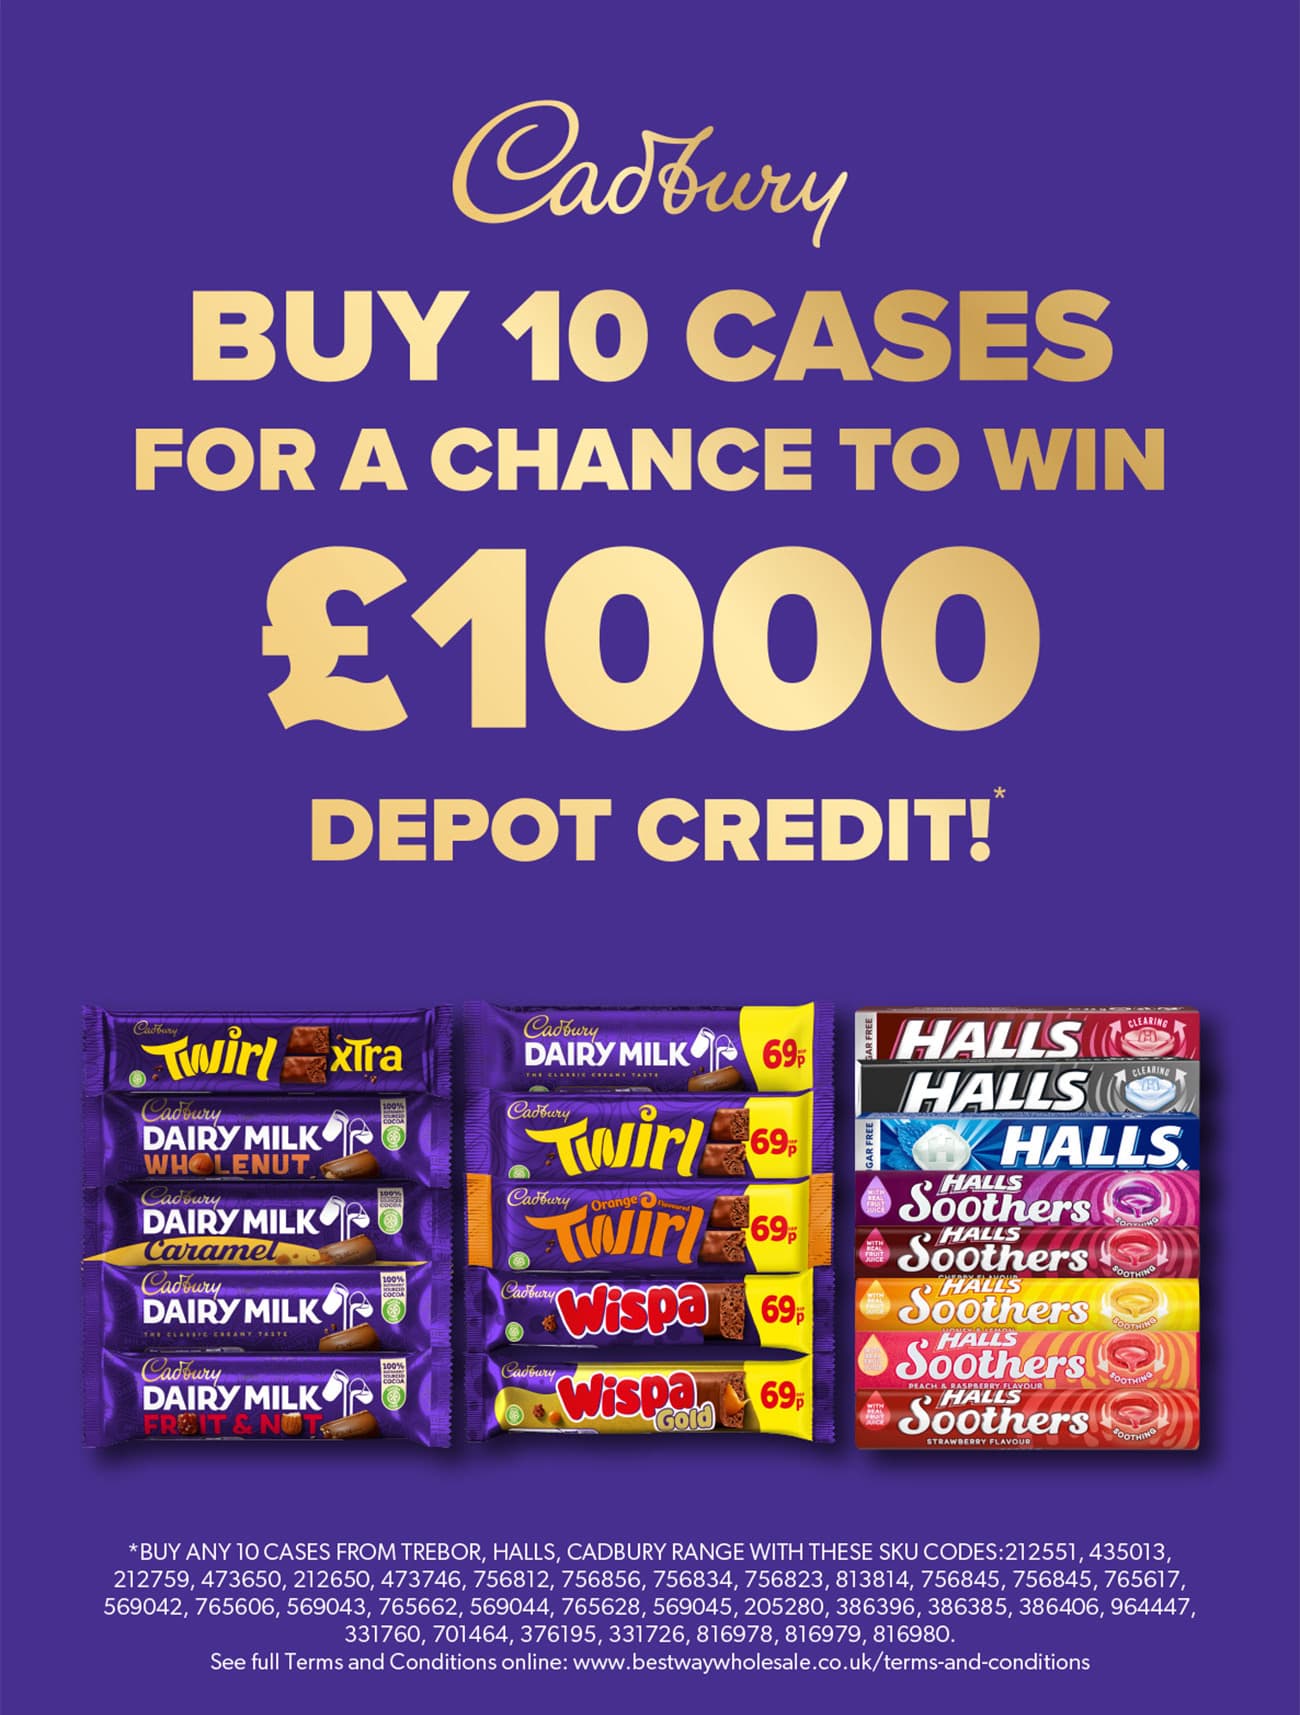 A chance to win £1000 of depot credit courtesy of Cadbury